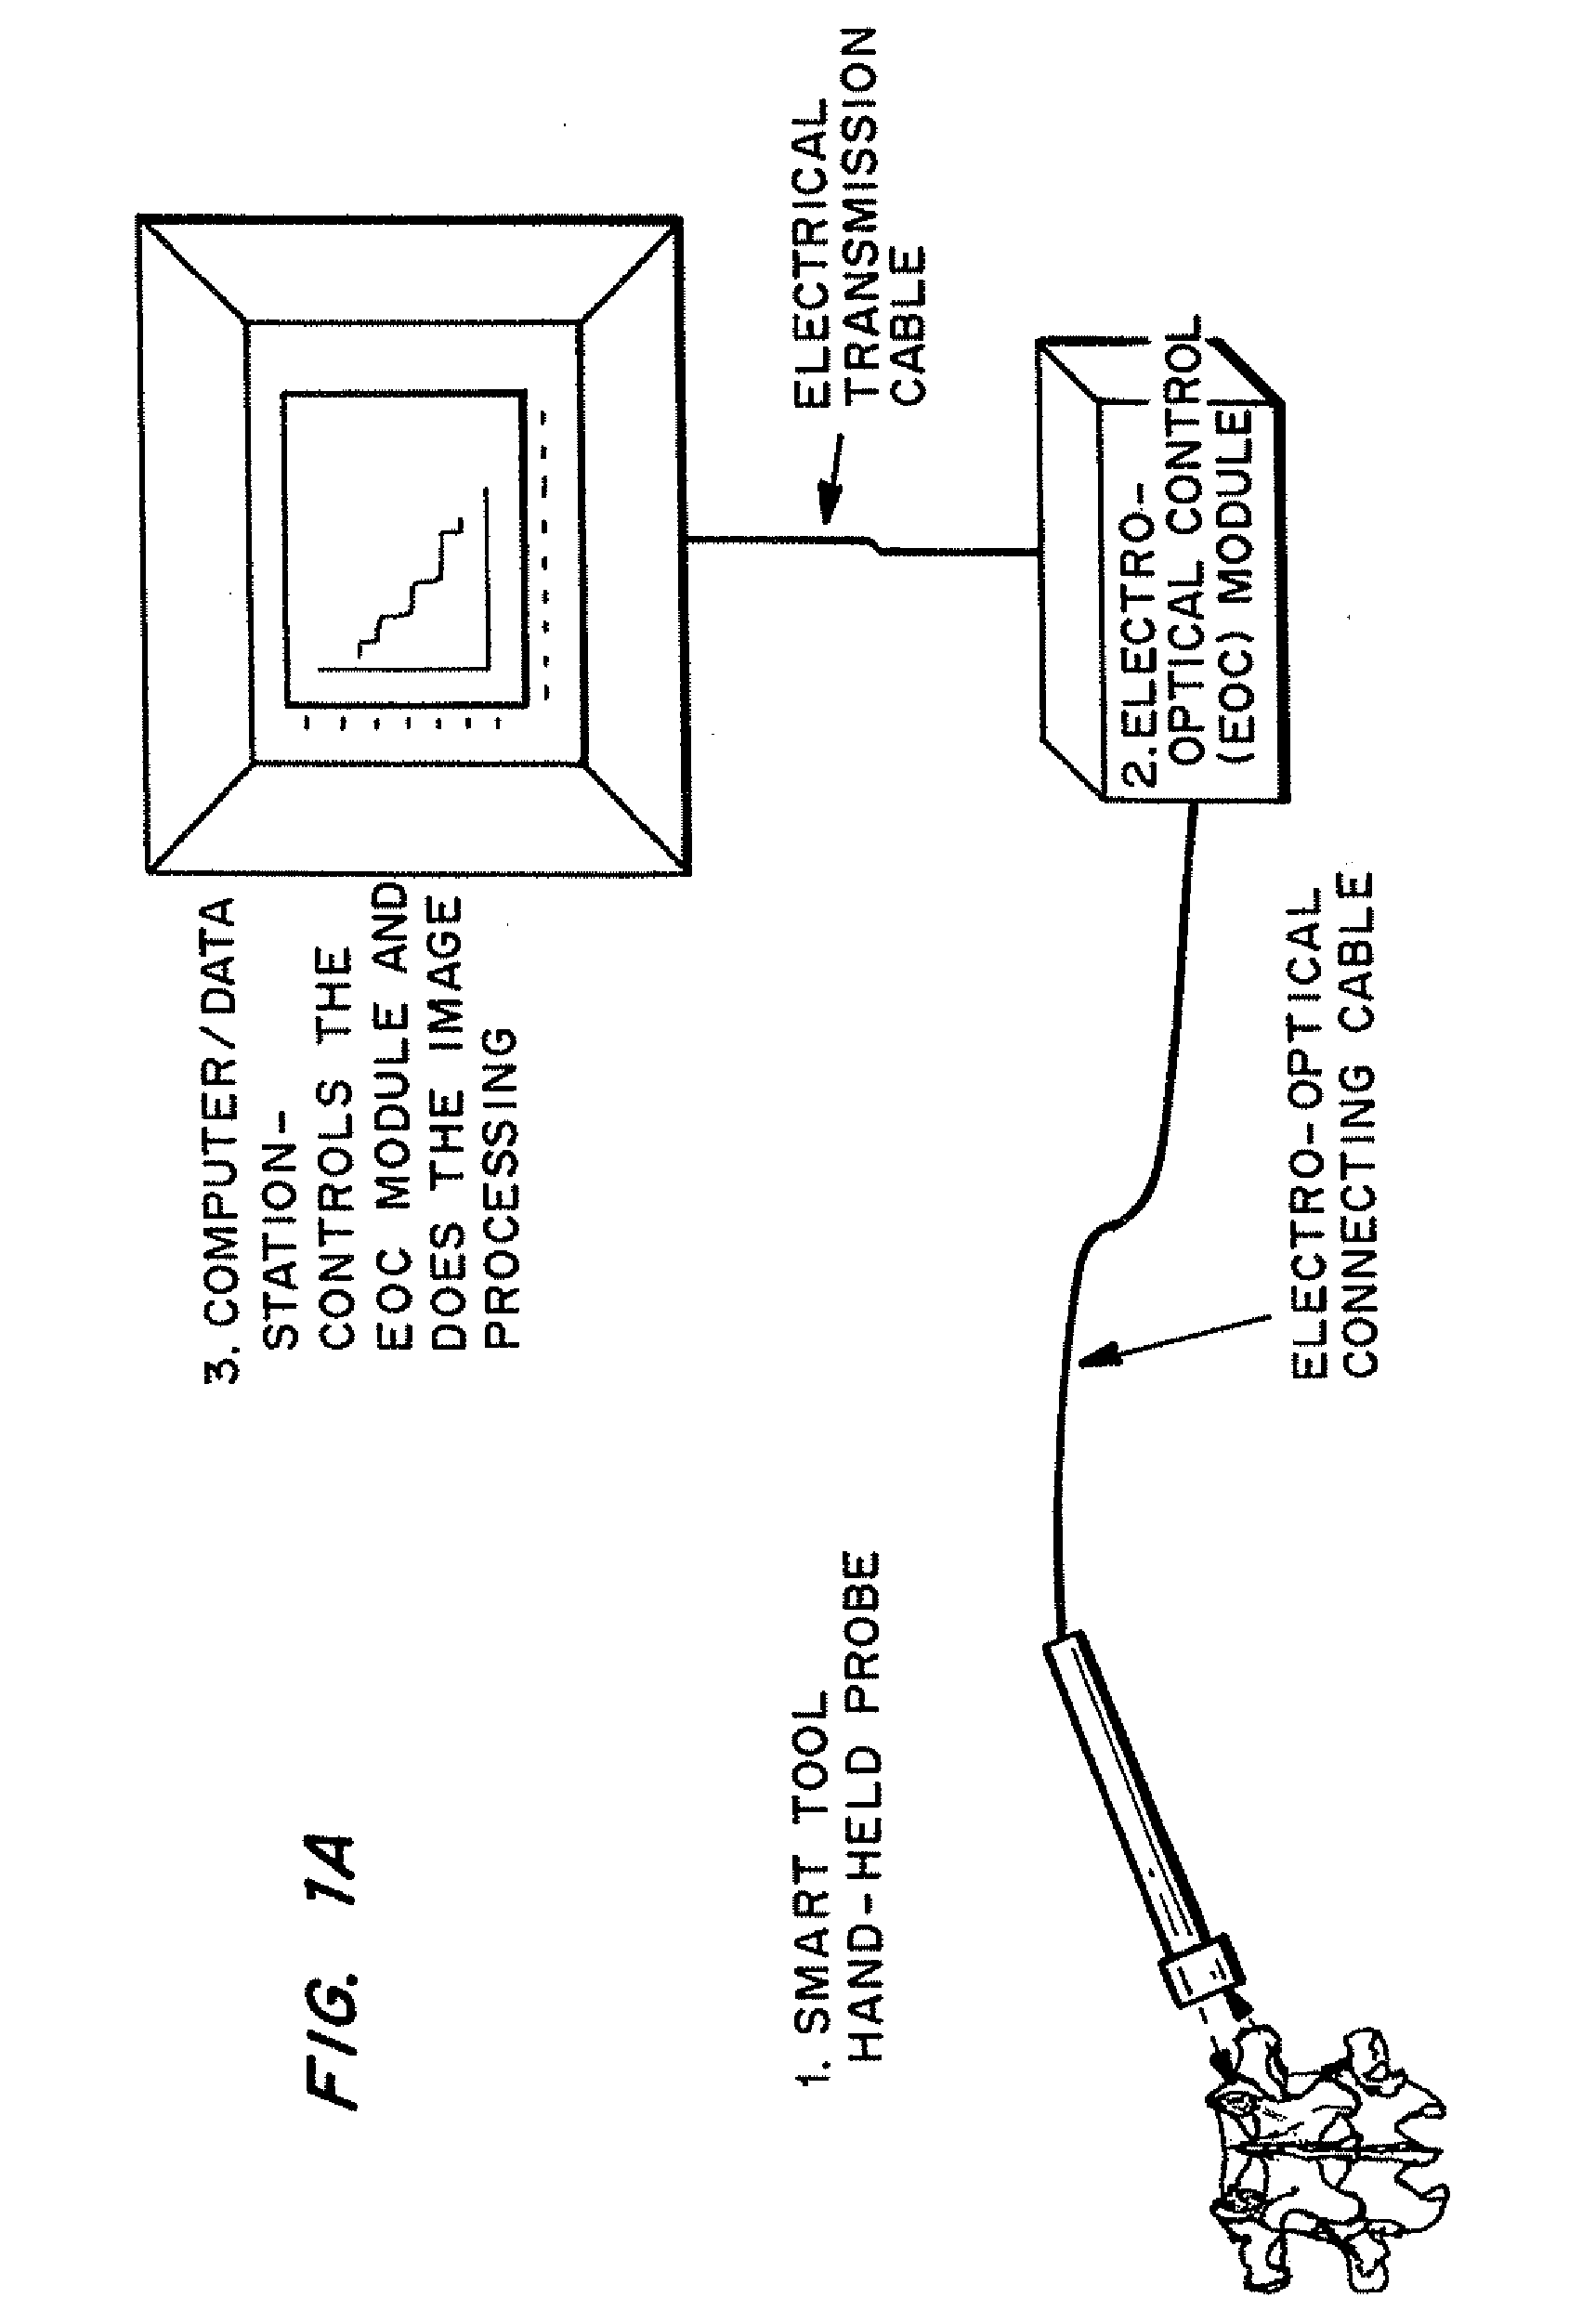 Methods and devices for in situ tissue navigation